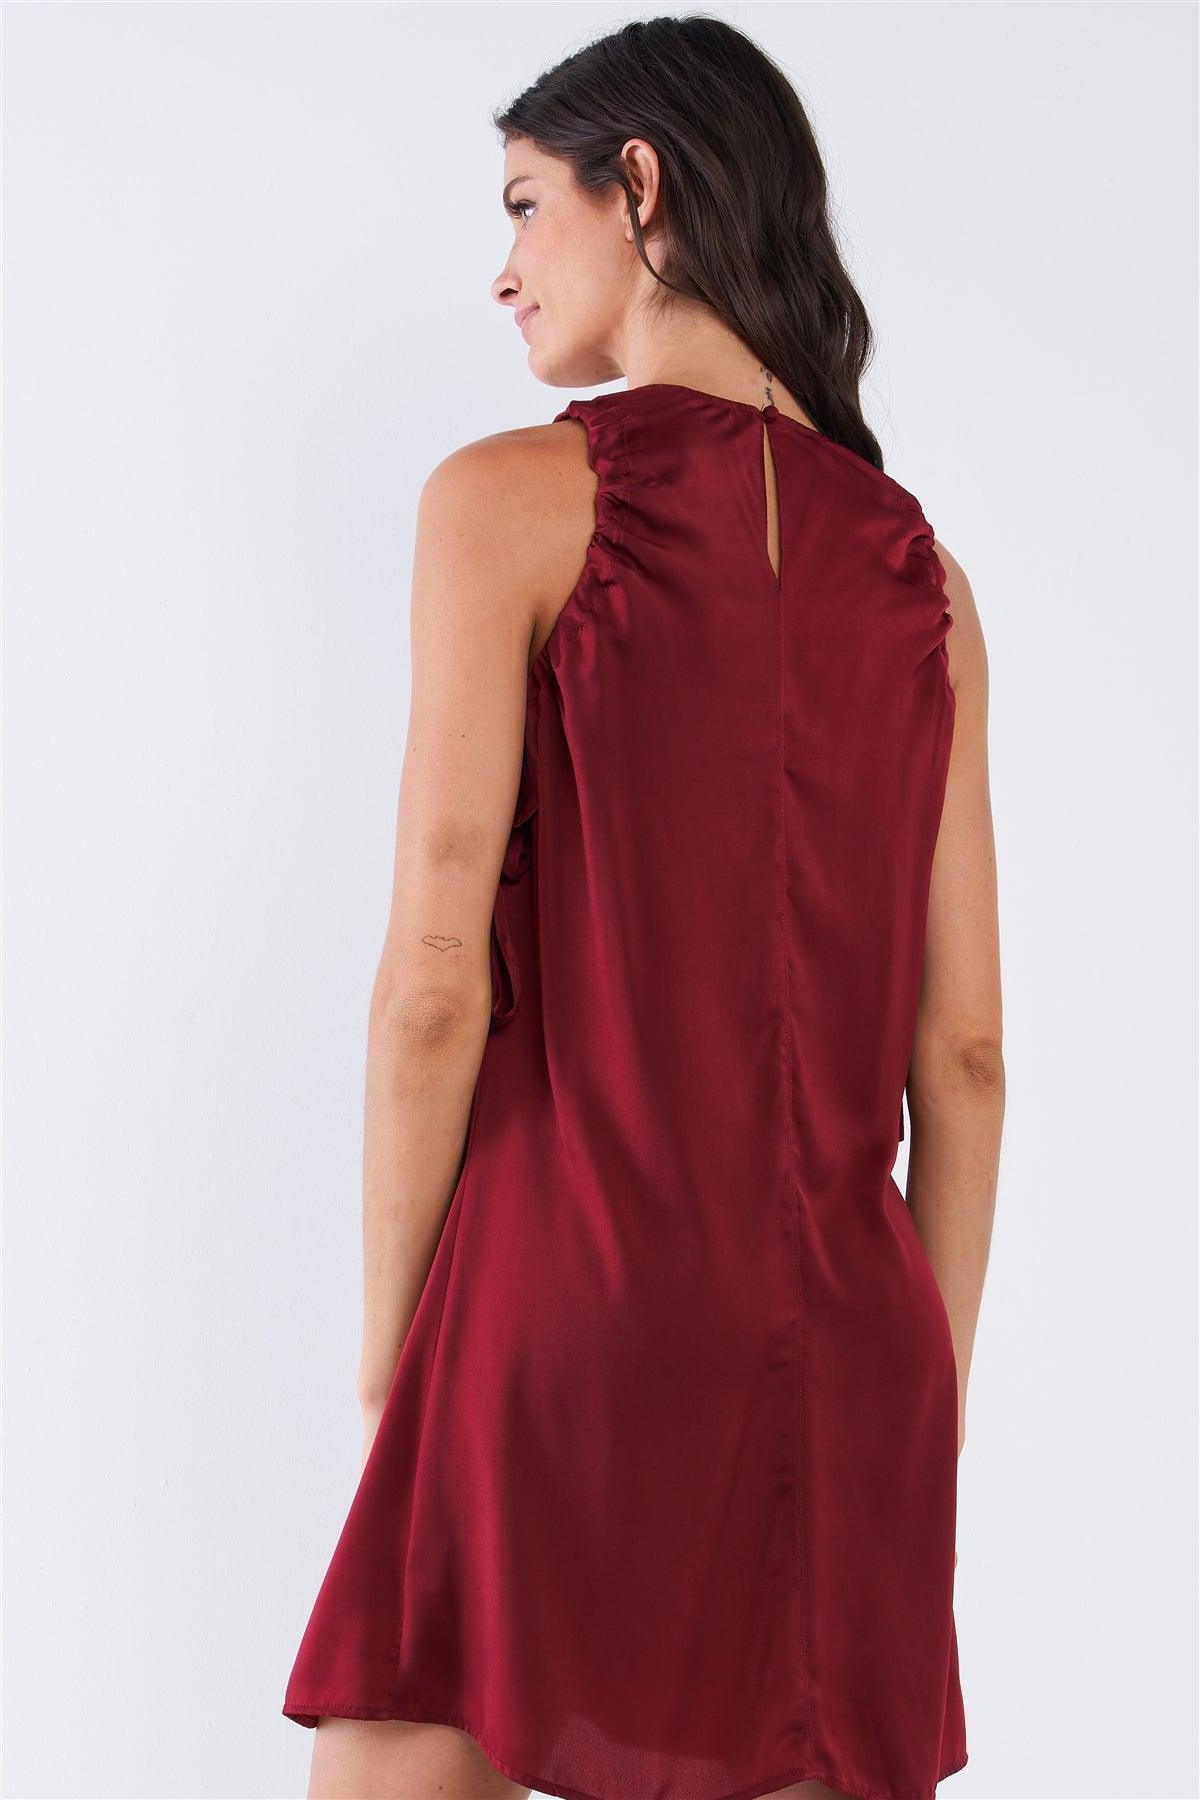 Wine Red Satin Loose Fit Sleeveless Round Neck Mini Dress With Side Ribbon Draw String Ties /1-2-2-1